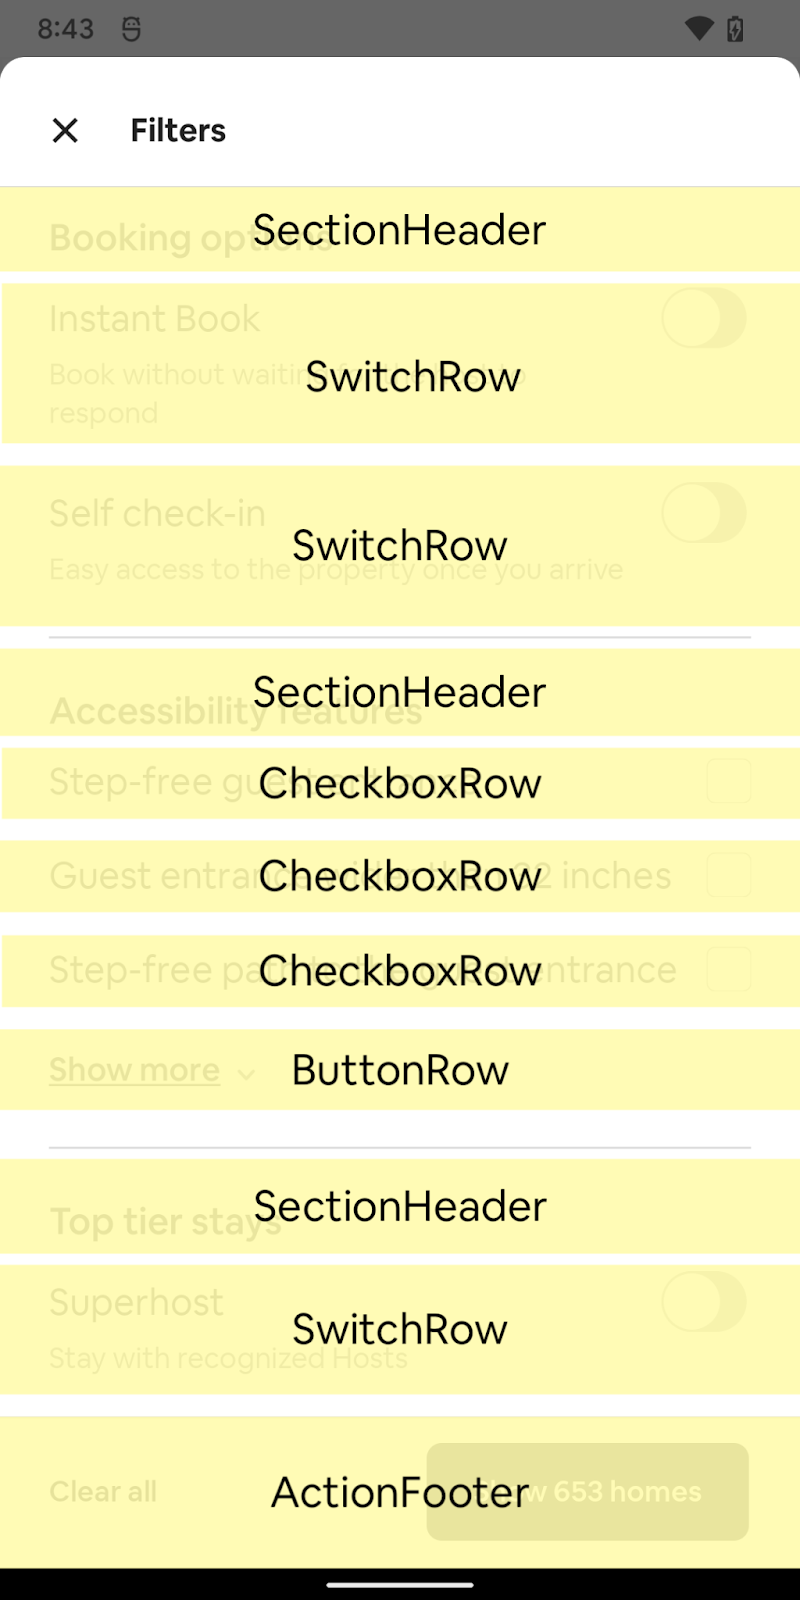 The same screen with component names overlaid on top, such as DocumentMarquee for the heading, LeadingIconRow and CheckboxRows.